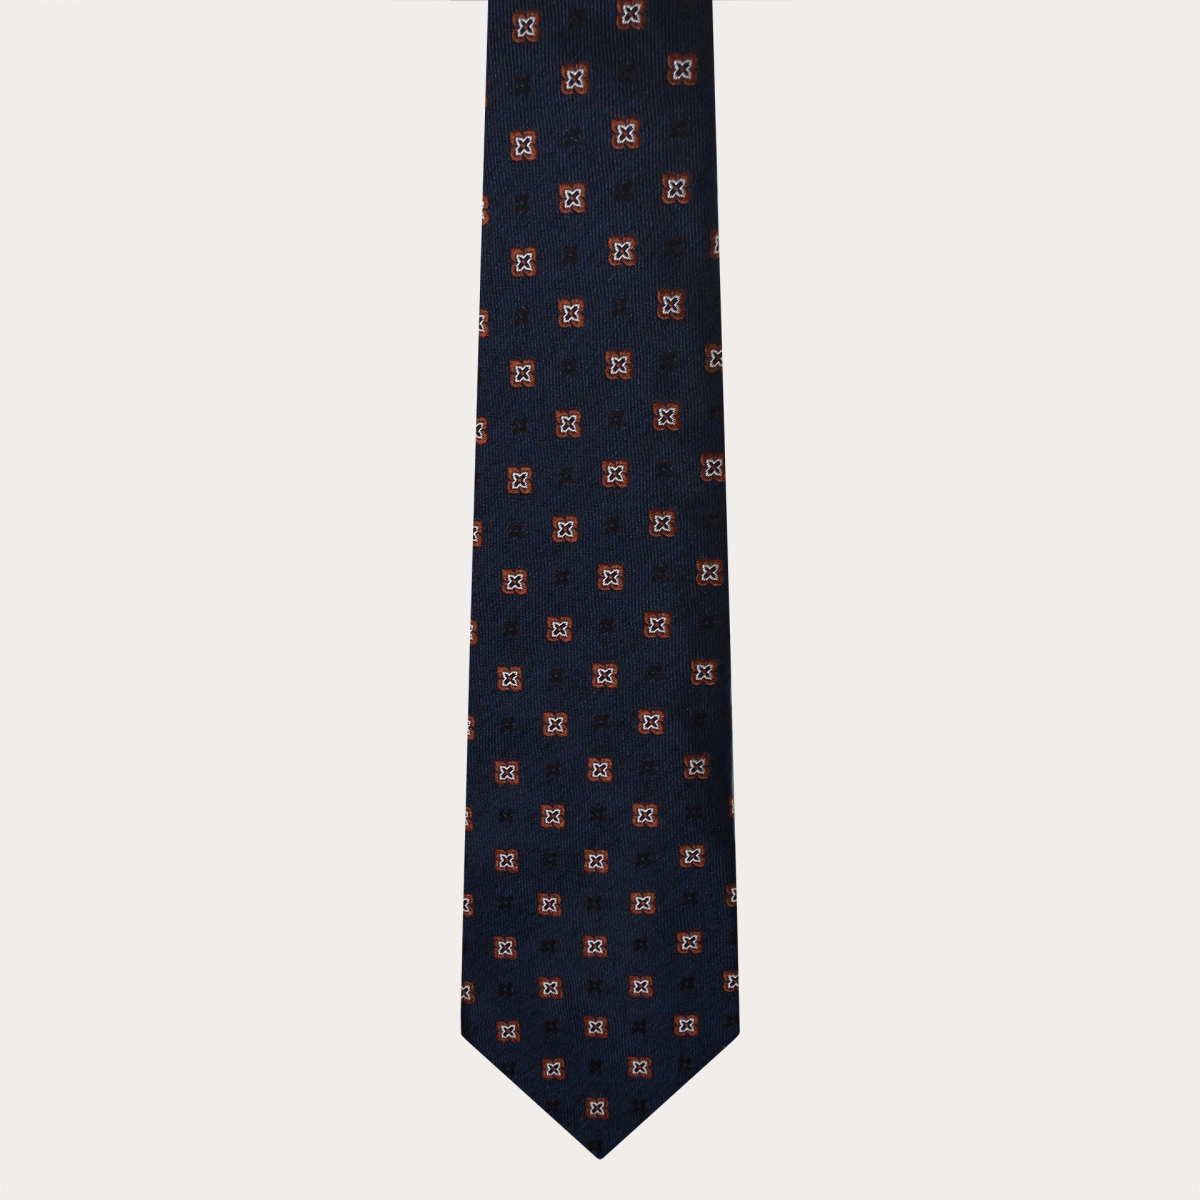 BRUCLE Formal tie in jacquard silk, blue with brown pattern